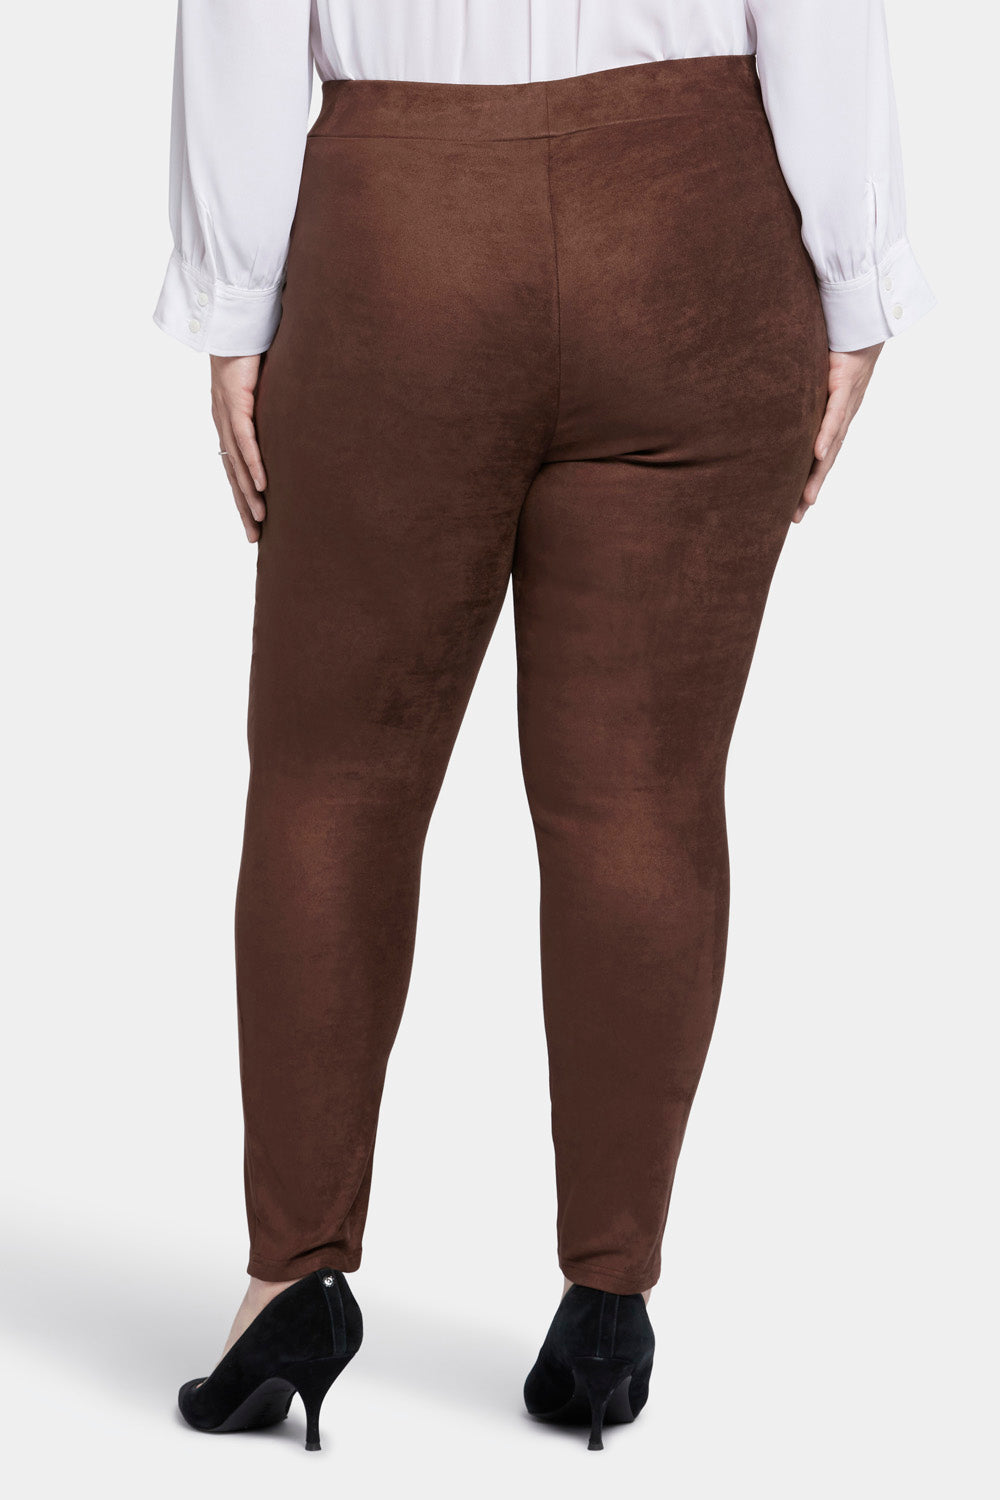 NYDJ Basic Legging Pants In Plus Size In Stretch Faux Suede - Dark Chocolate